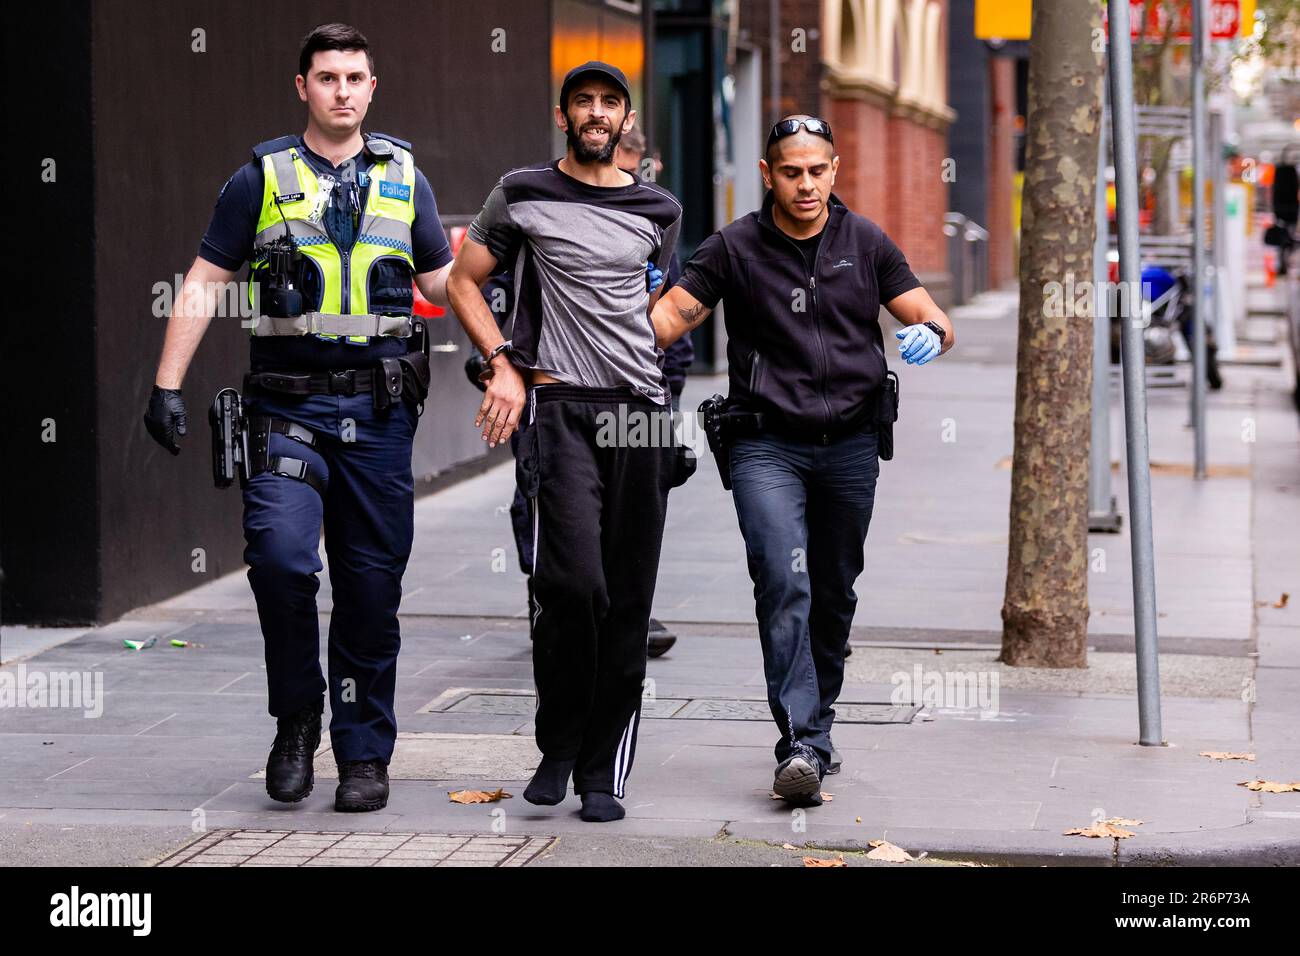 MELBOURNE, AUSTRALIA - MAY 28: A man is arrested for allegedly dealing drugs in the CBD on 28 May, 2020 in Melbourne, Australia. With international flights in and out of Australia almost entirely halted and stricter security measures due to COVID-19, experts are predicting a major decrease in the amount of illicit drugs entering Australia illegally. The side effect being that this may force many to turn to alternative drugs more available locally. Stock Photo